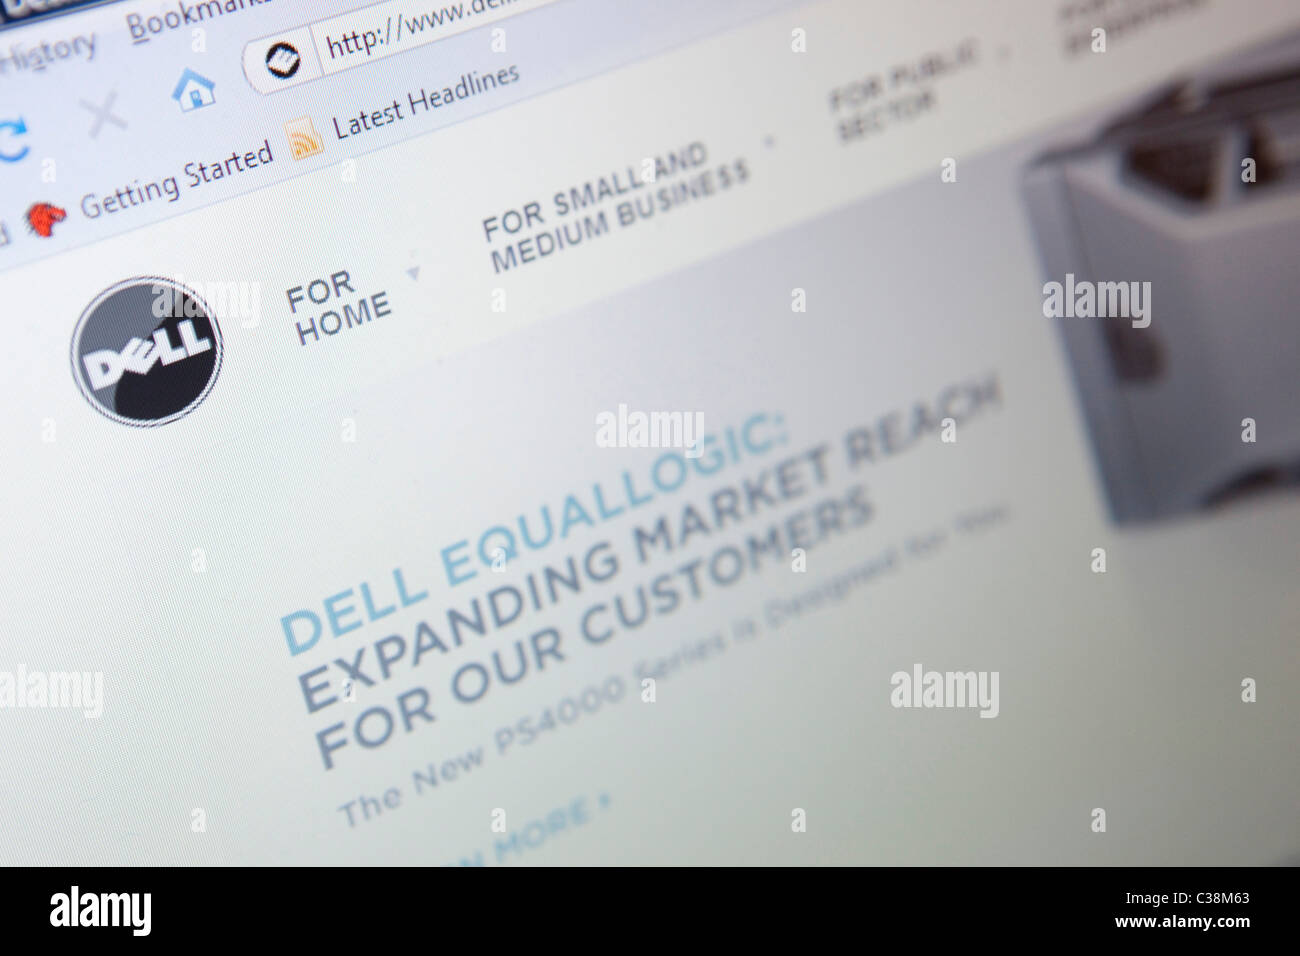 Illustrative image of the Dell website. Stock Photo